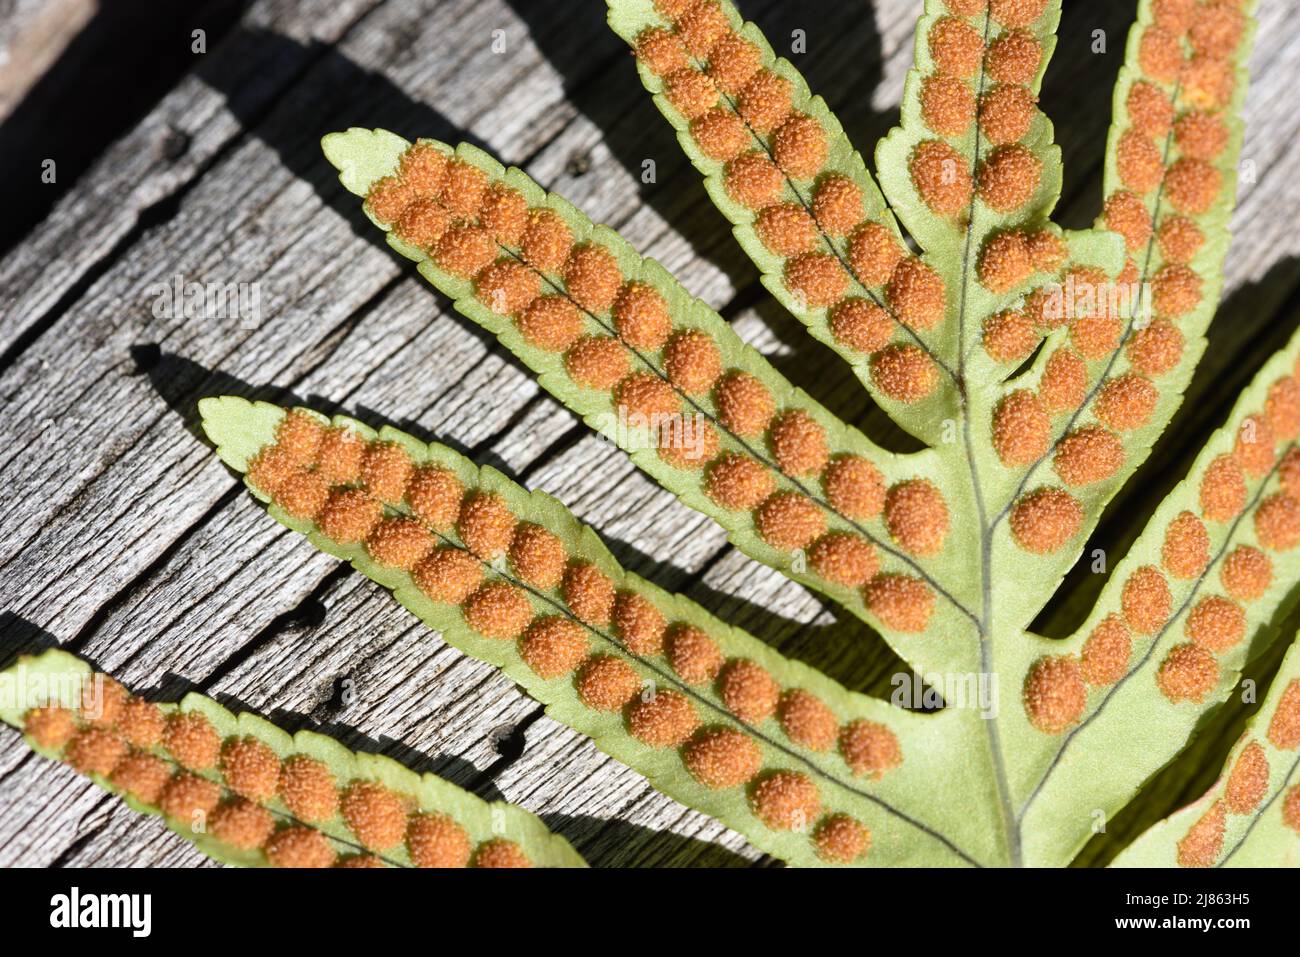 Sorus, or Cluster of Spores or Sporangia, on Underside of Leaf of Common Polypody Fern, Polypodium vulgare Stock Photo